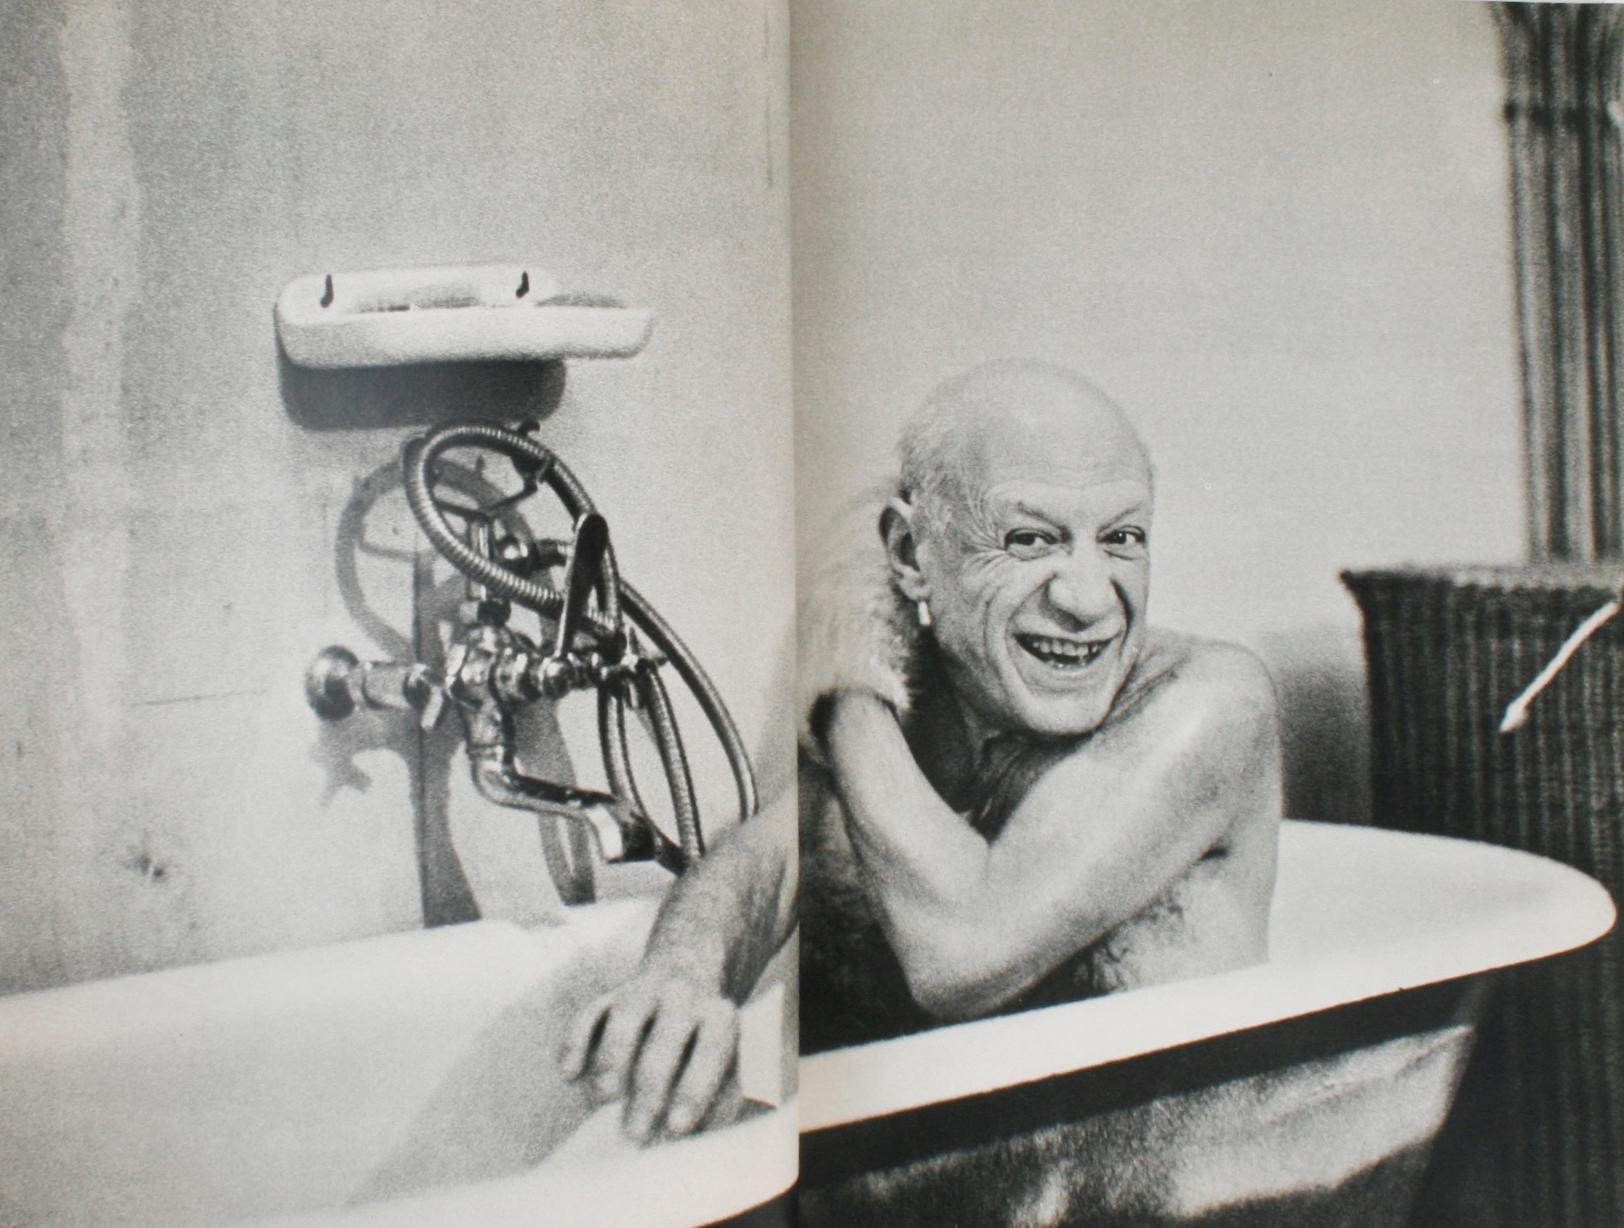 American The Private World of Pablo Picasso by David Douglas Duncan